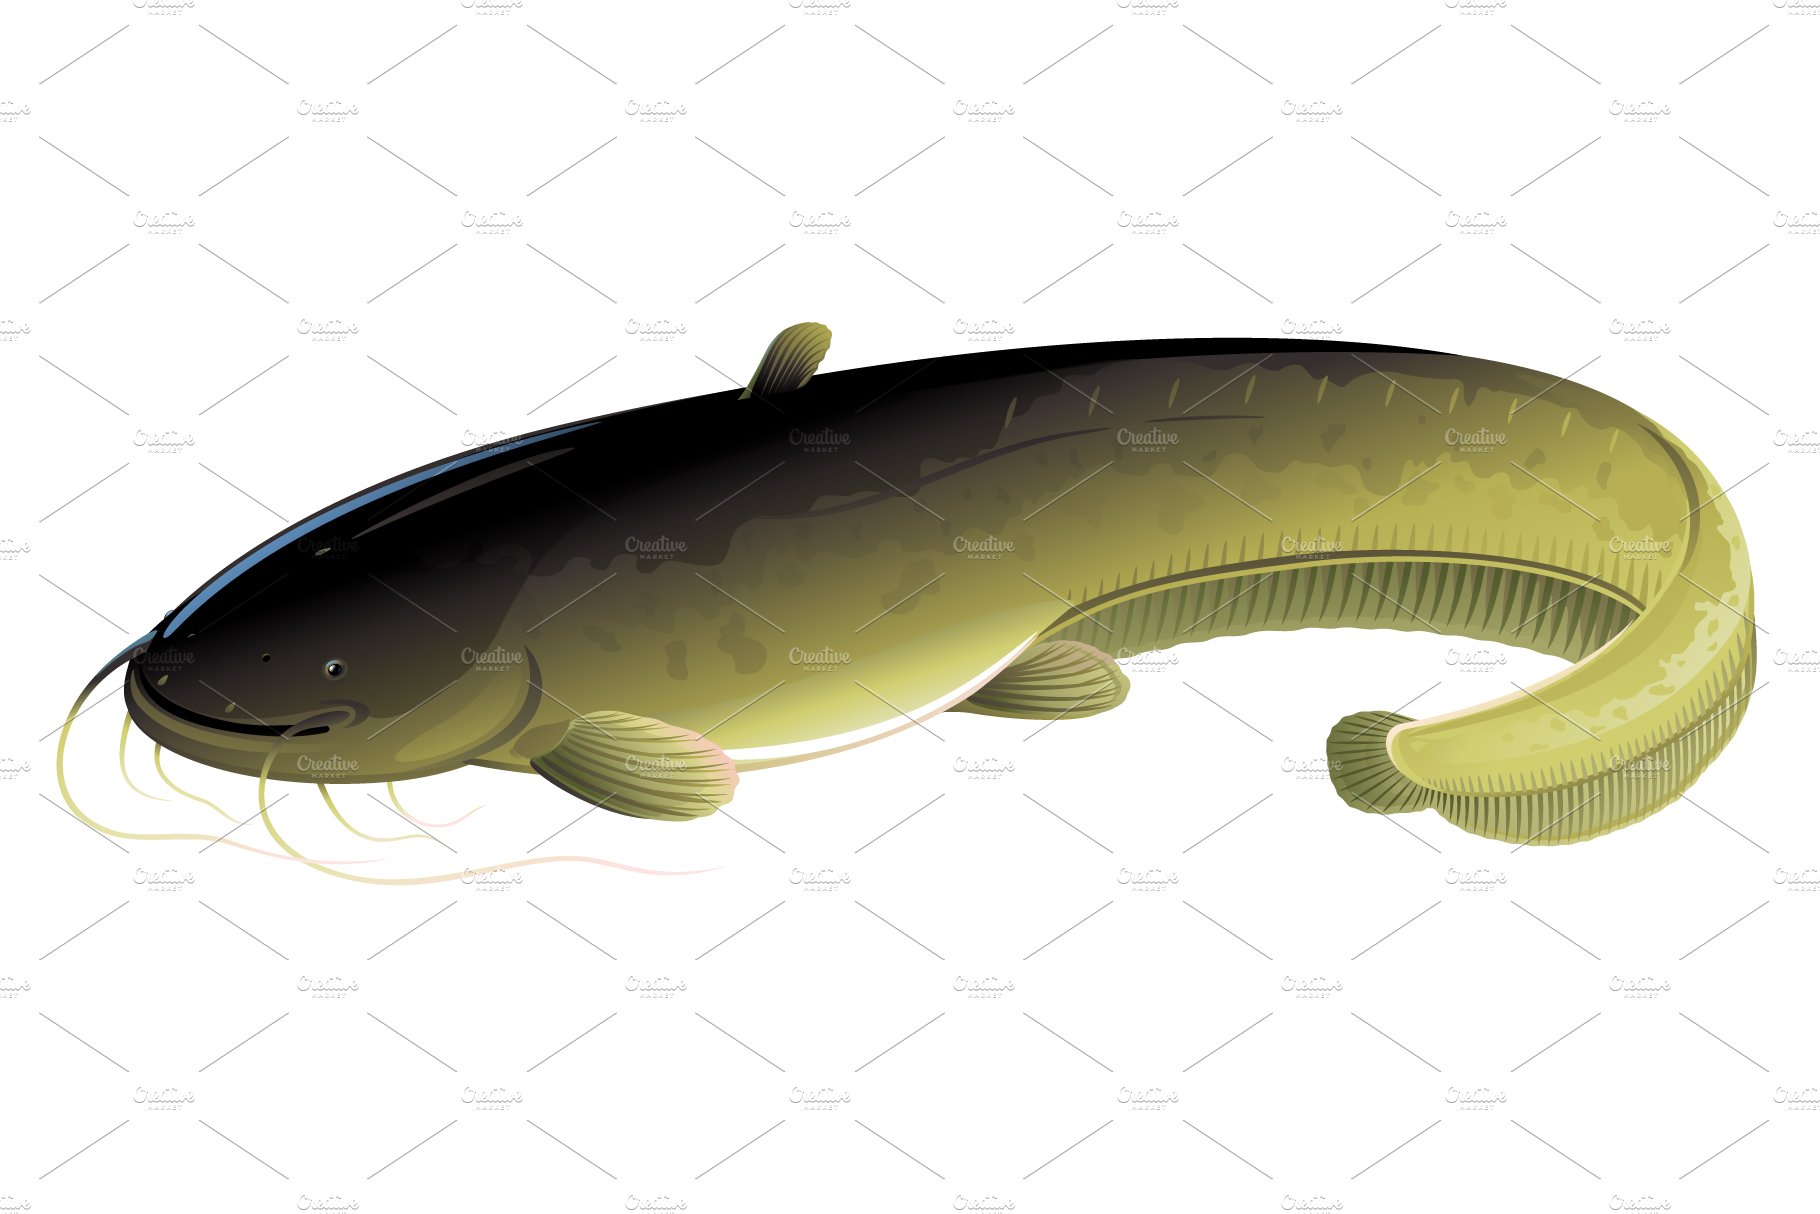 Wels catfish cover image.